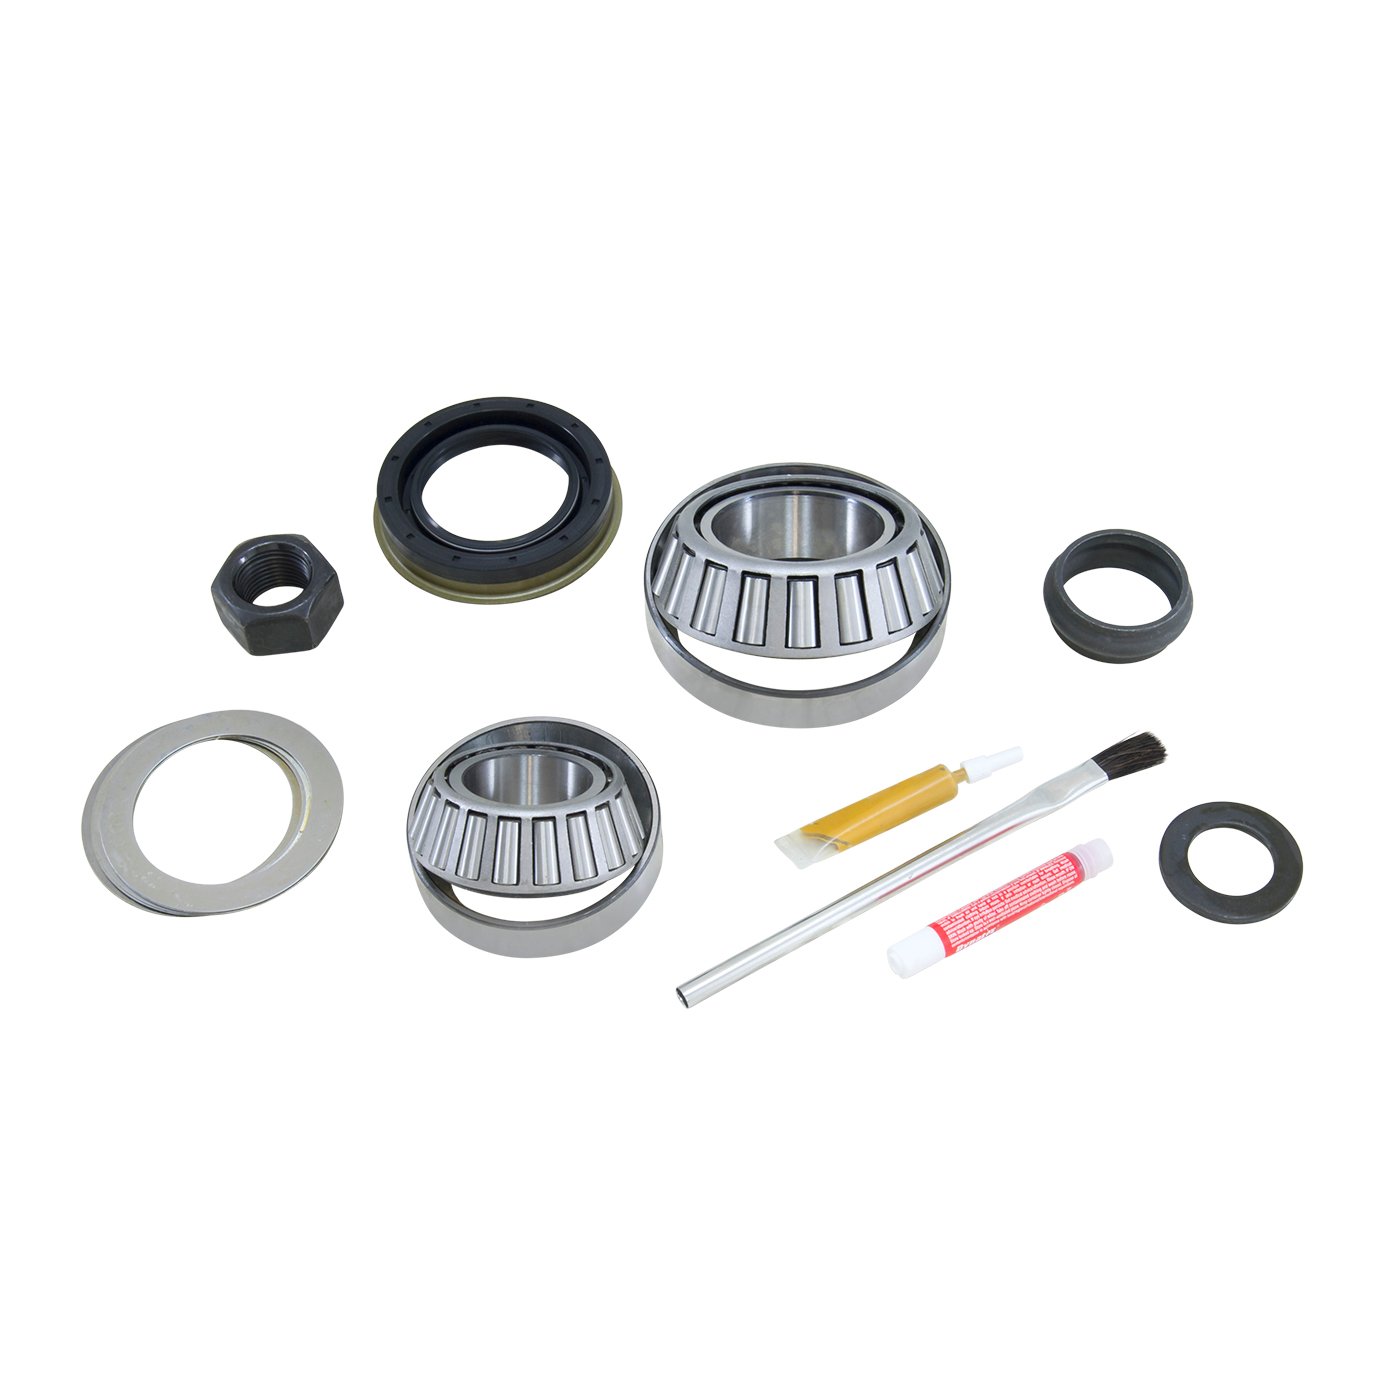 Pinion Install Kit For Dana 44 -Hd Ica Differential For Corvette Or Viper